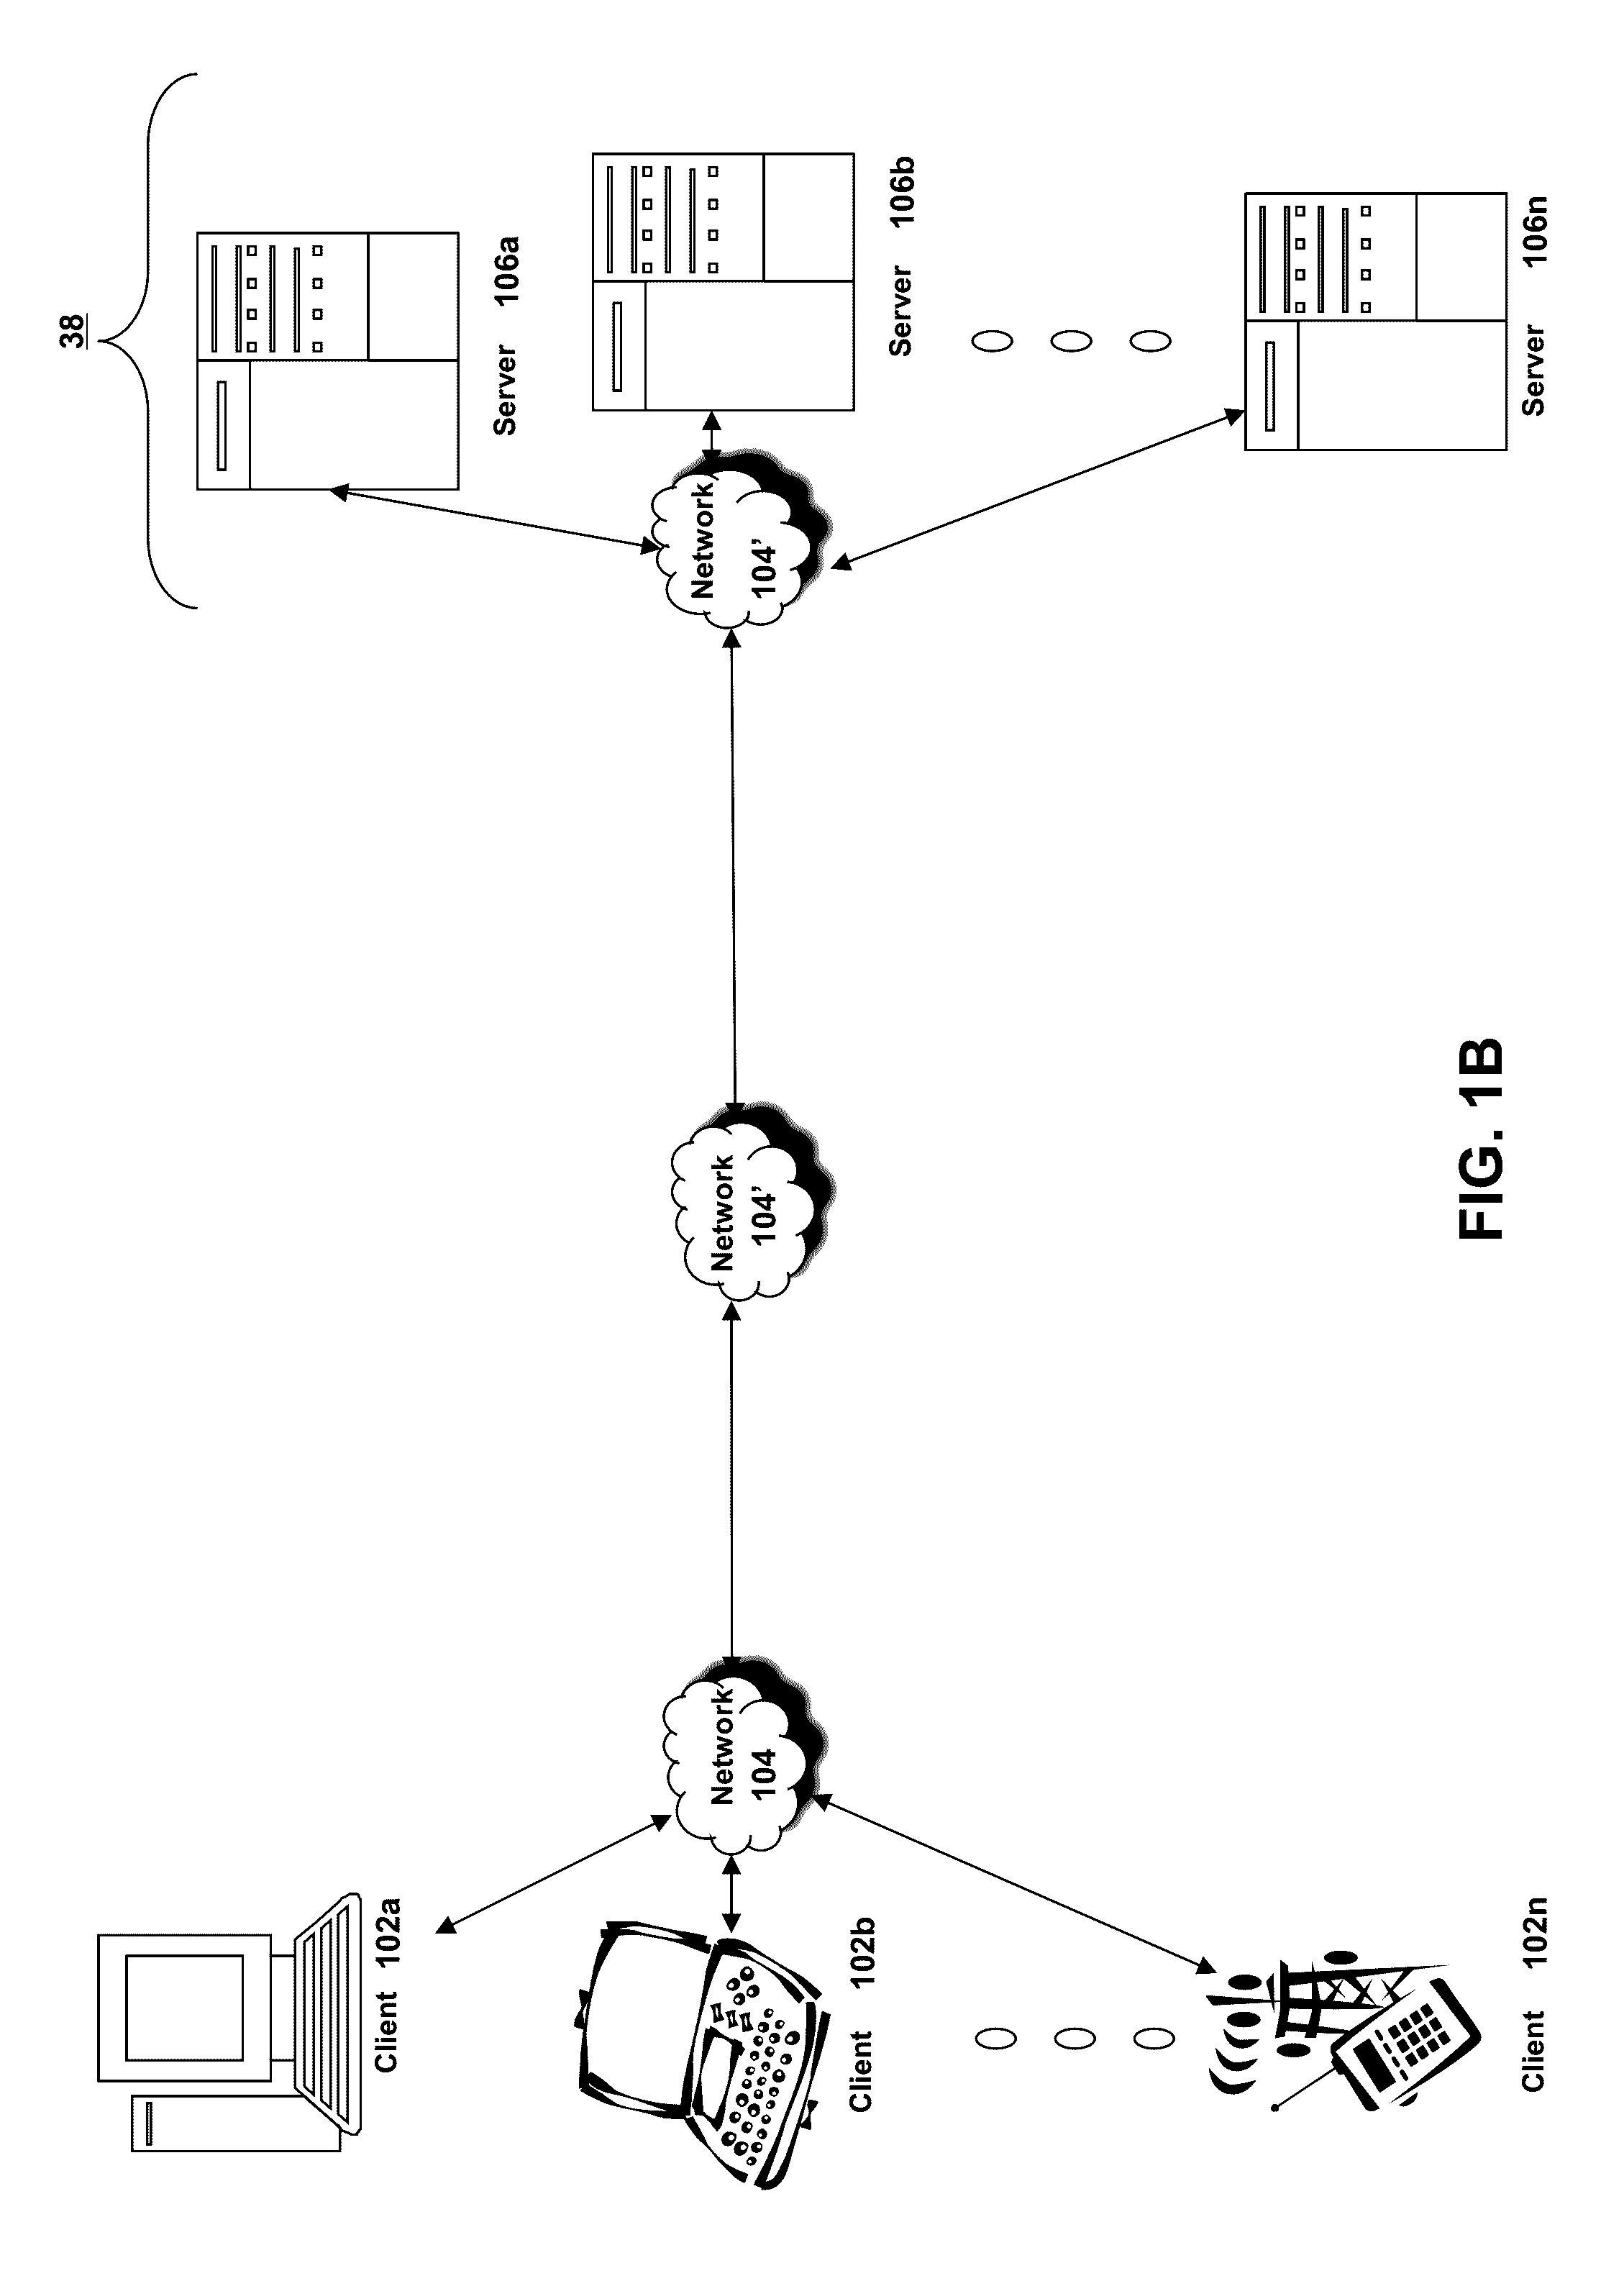 Systems and methods for performing dual DNS lookup to detect public versus intranet